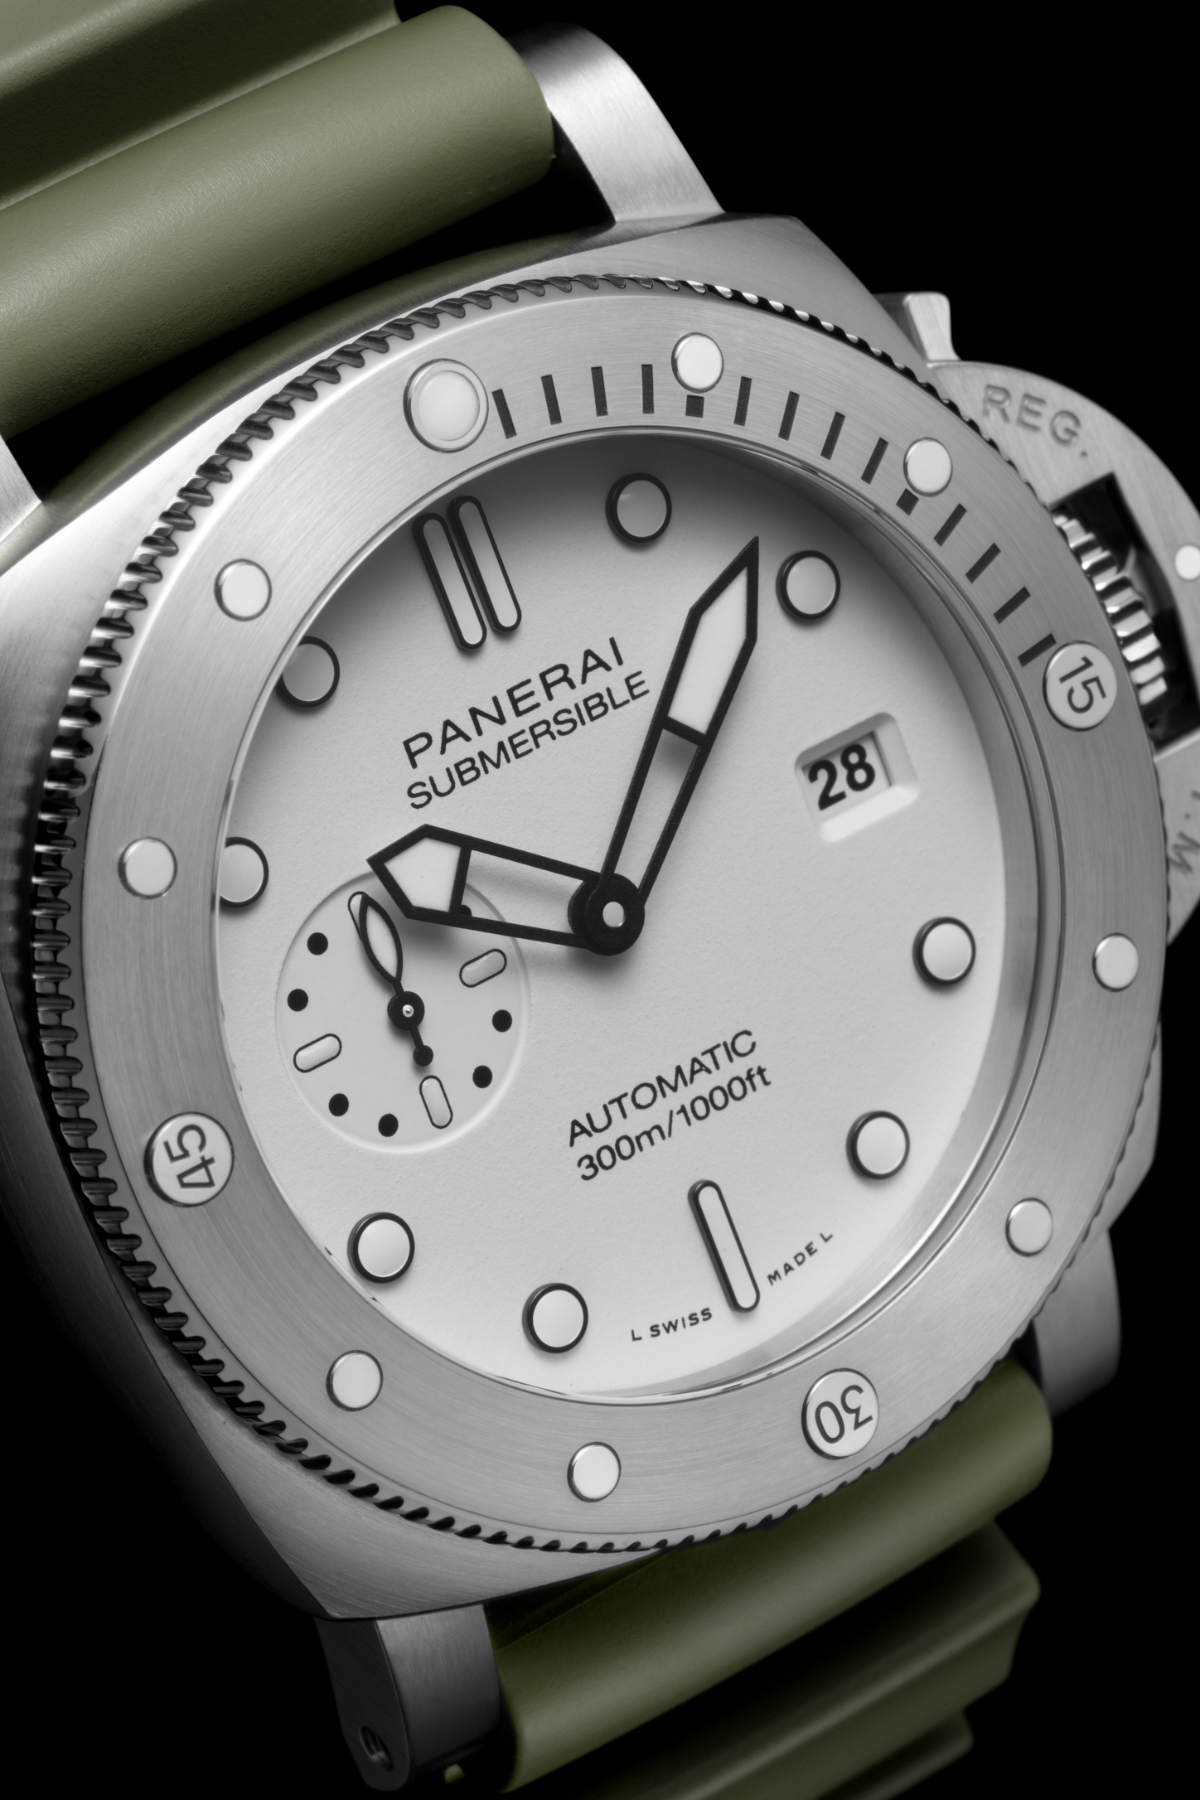 Panerai: QuarantaQuattro Brings A New Dimension To The World Of Submersible